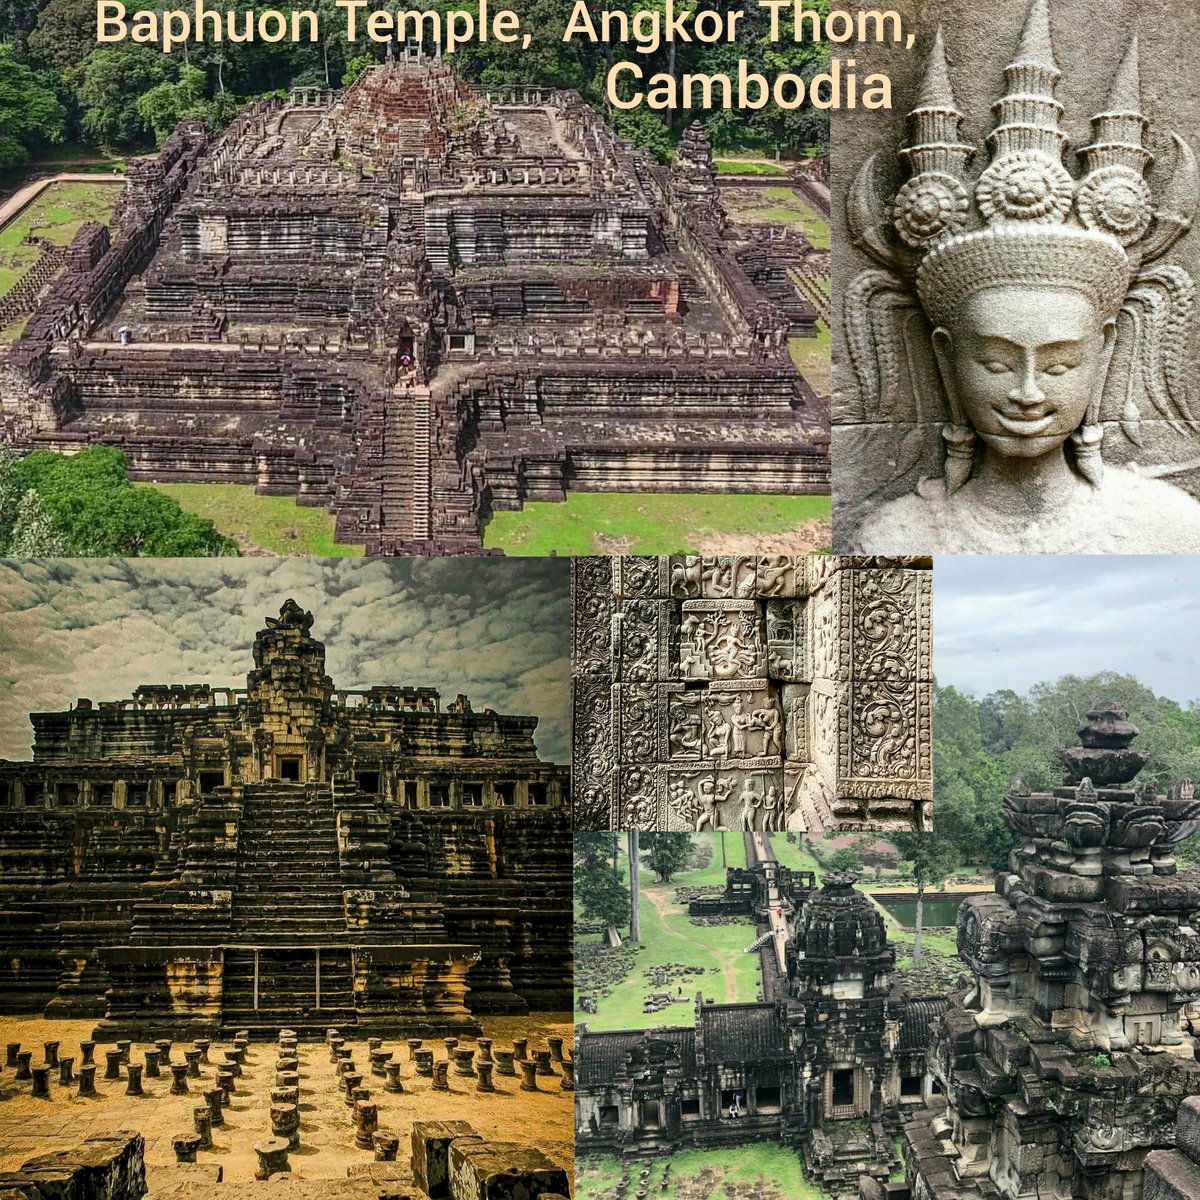 4) #Baphuon_Temple and  #Bayon_Temple both are located in Angkor Thom, Cambodia. #BaphuonTemple was built in the mid 11th-century and this temple is dedicated to Bhagwan Shiv.  #BayonTemple was Built in the late 12th or early 13th century.  @hathyogi31 #India_beyond_Ganga #Hinduism